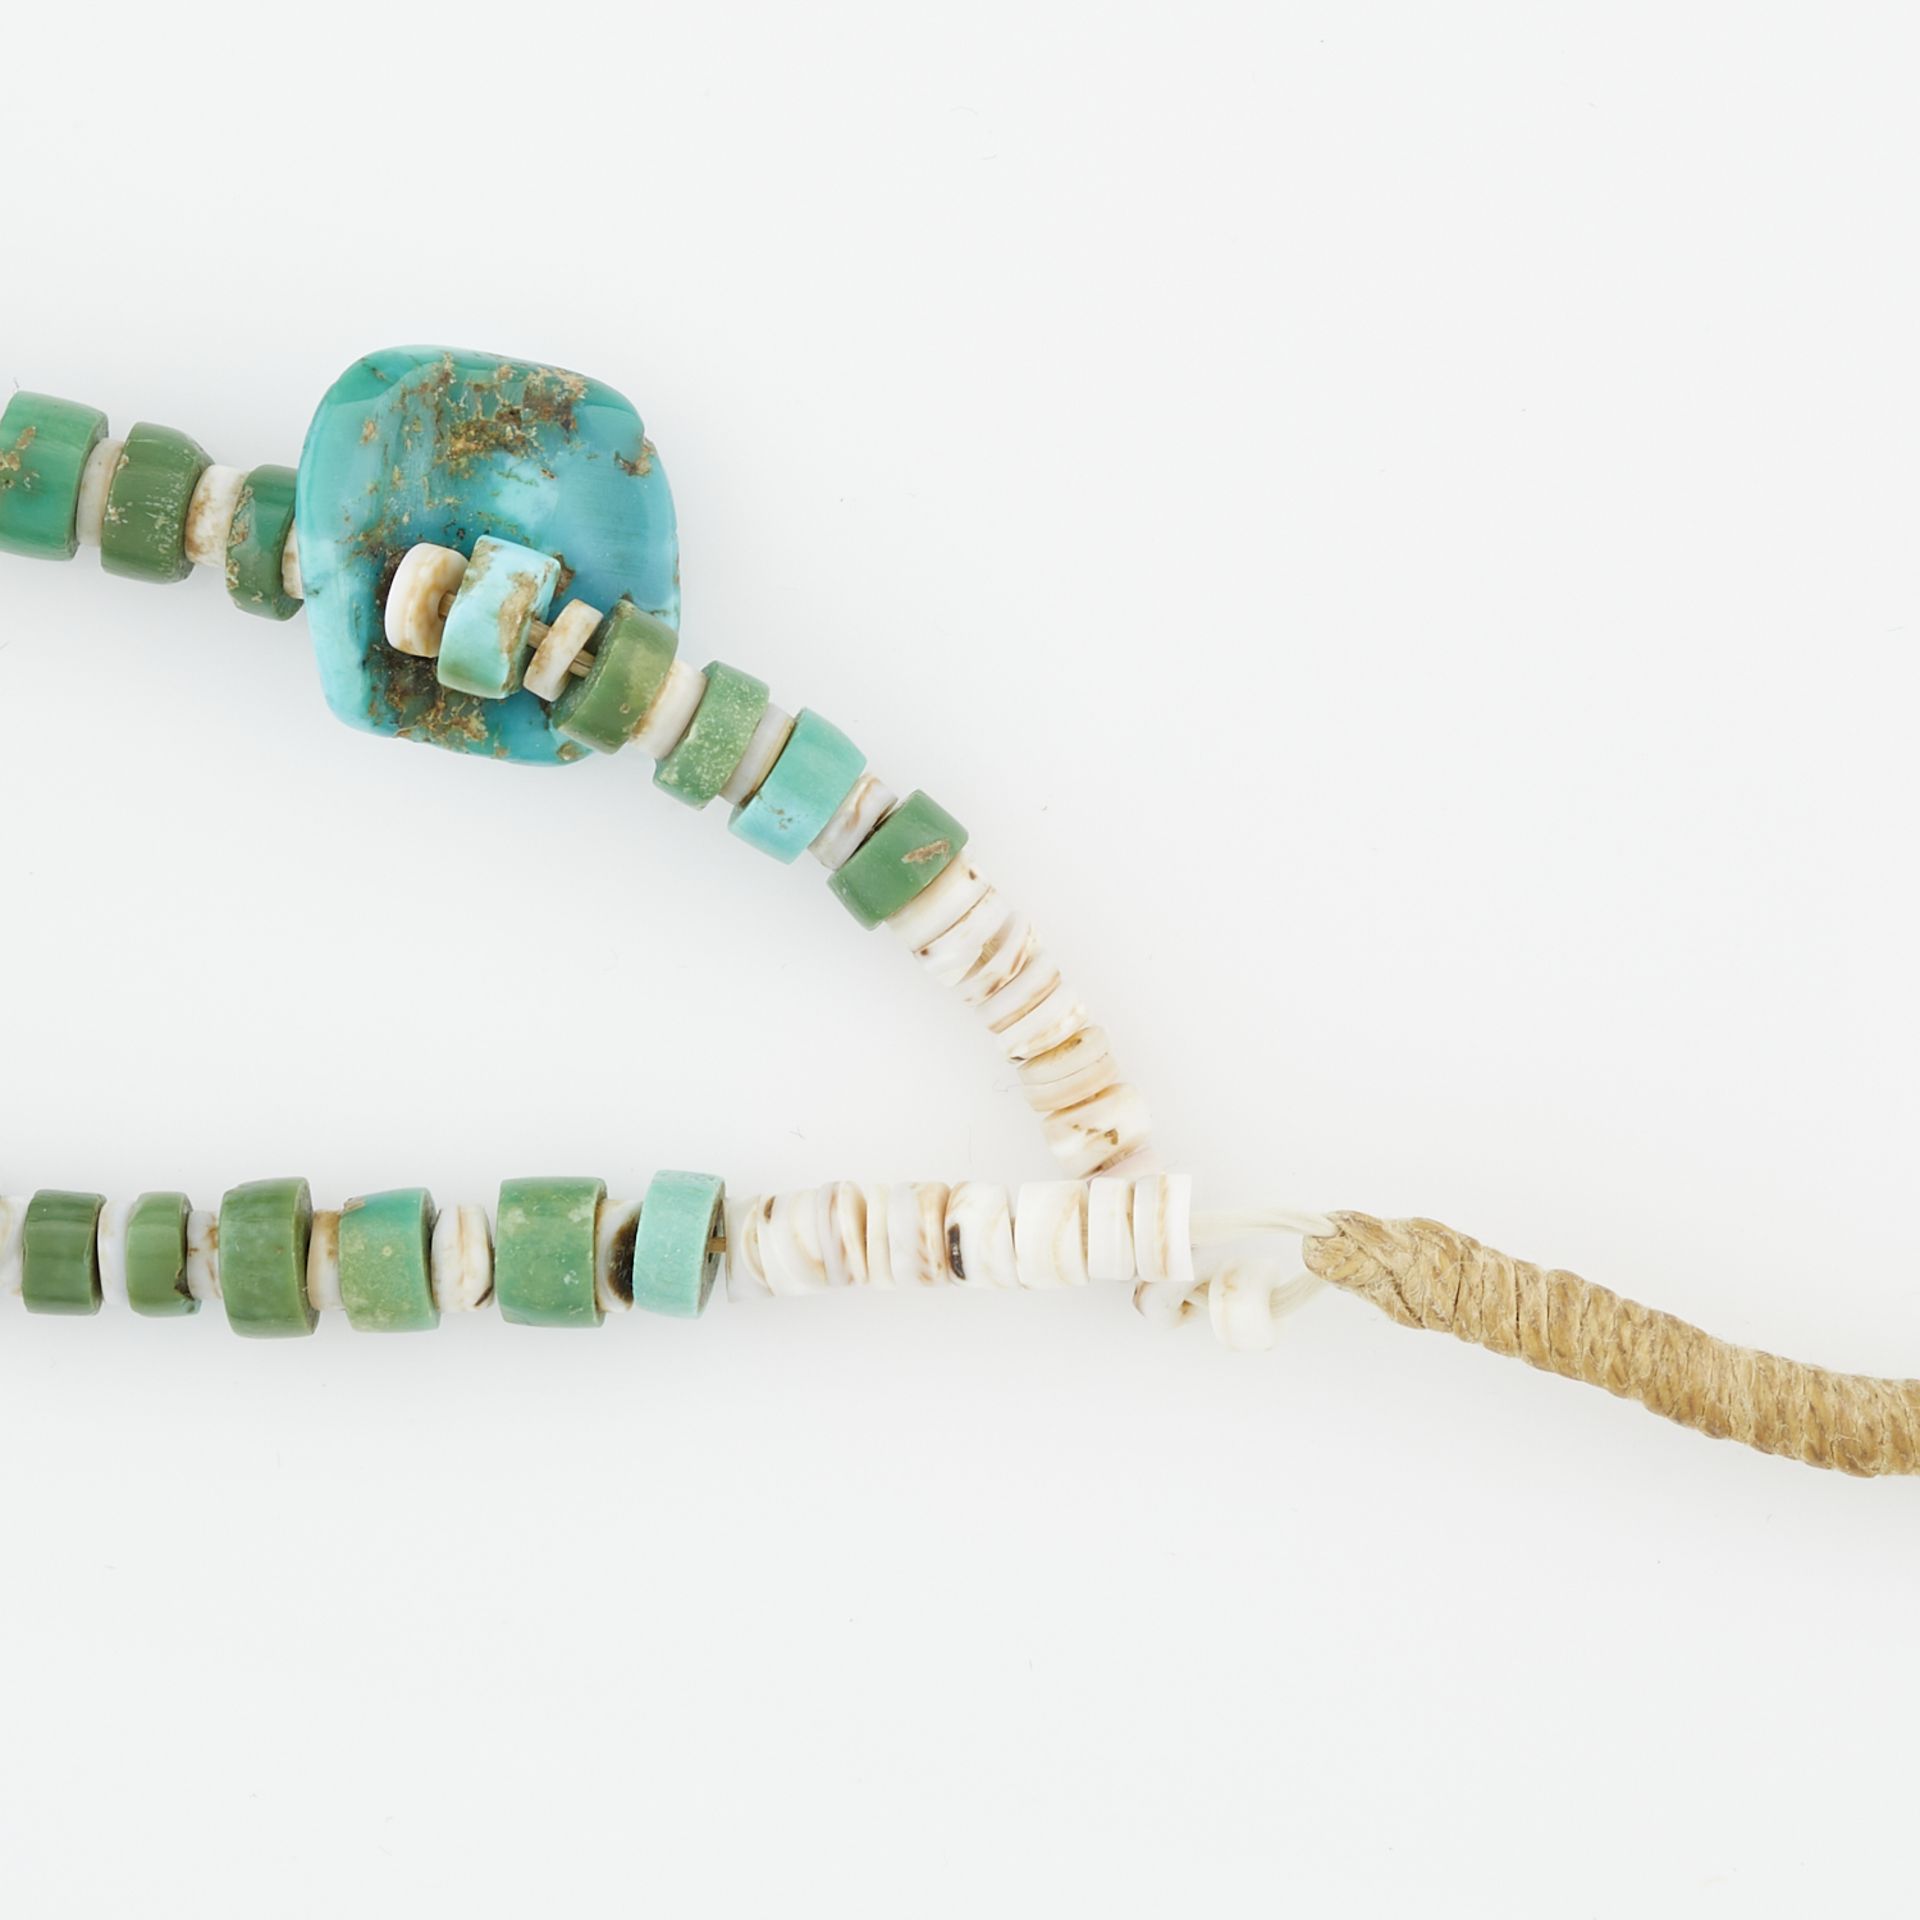 Two Strand Turquoise Heishi Necklace - Image 6 of 6